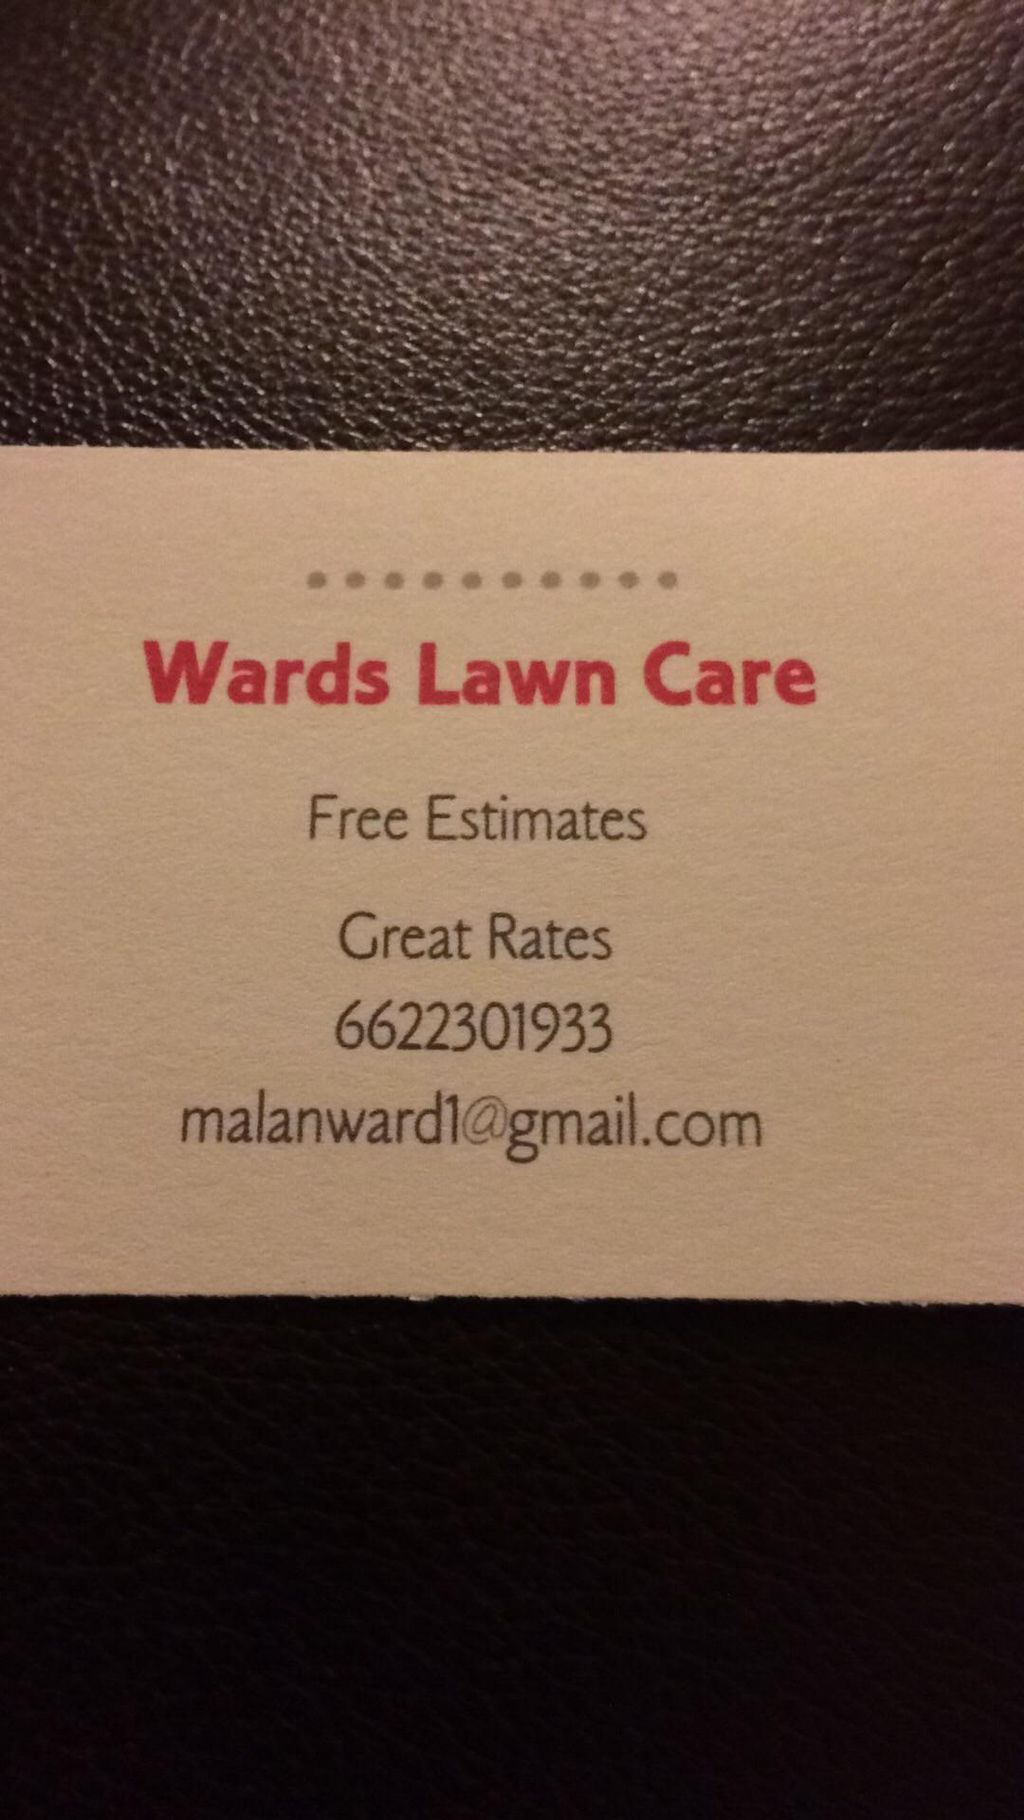 Wards lawn Care